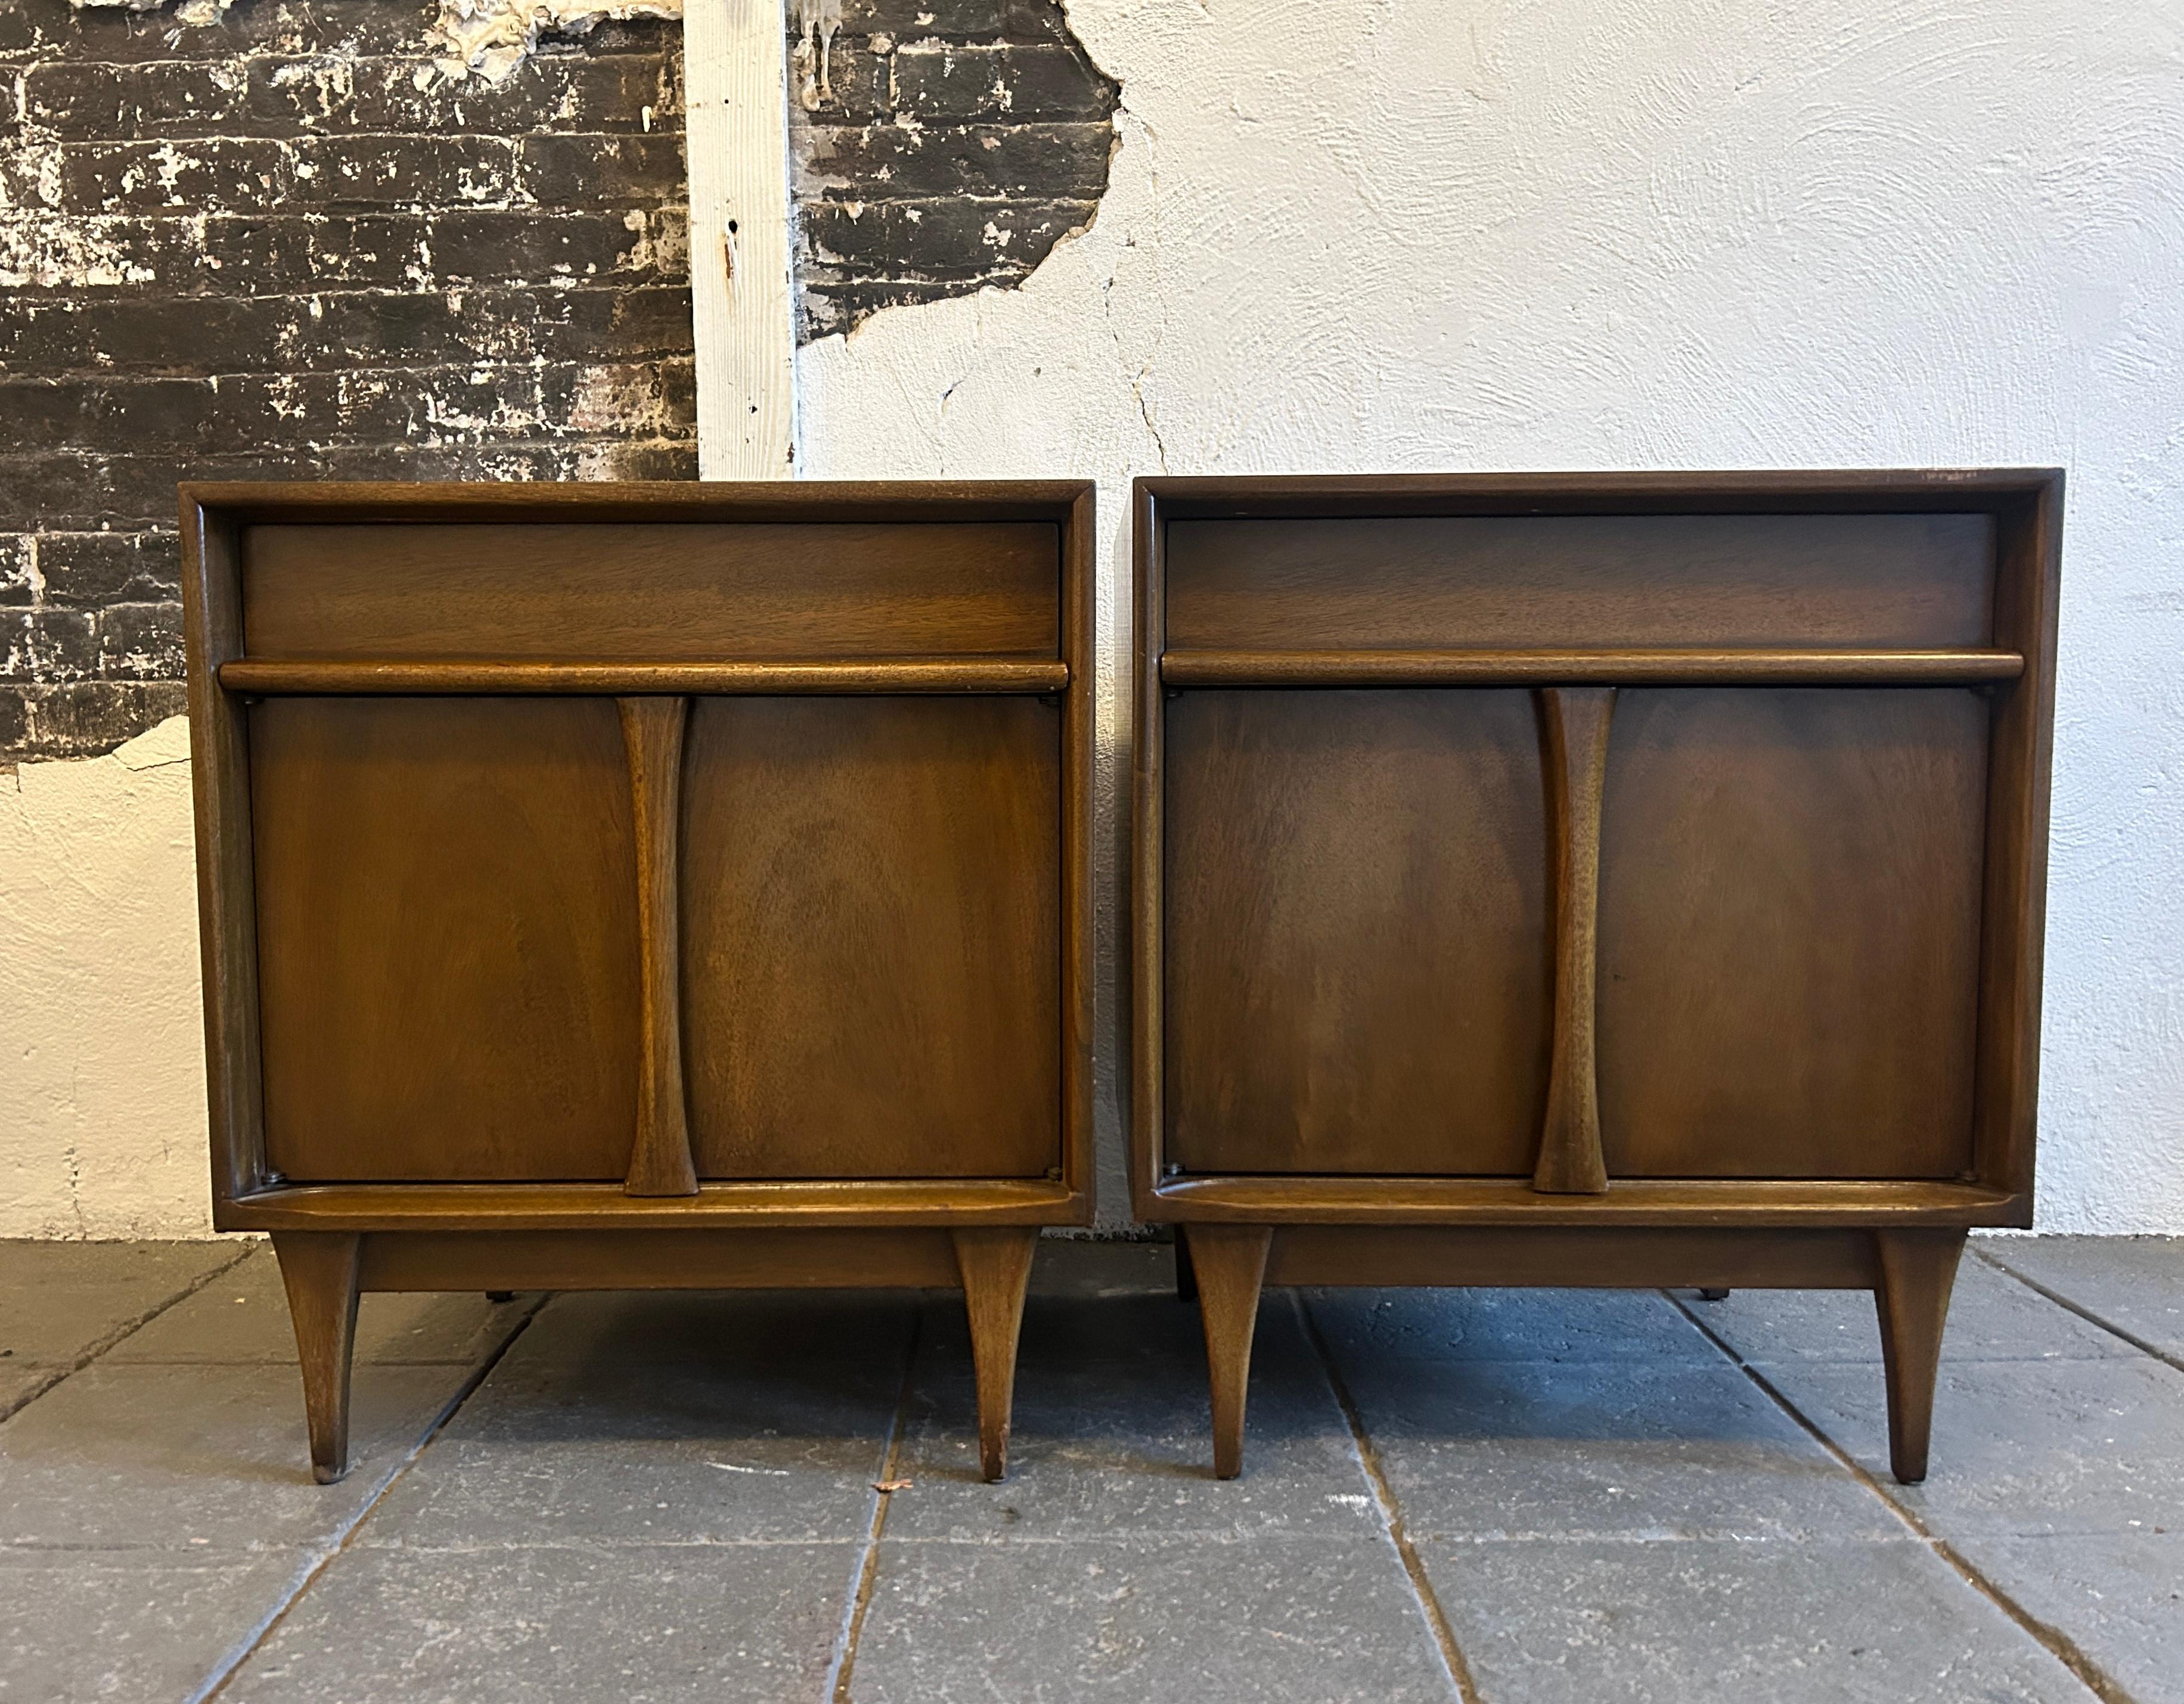 Pair of Mid century Modern American walnut nightstands. Sculpted fronts with a single top drawer and a lower cabinet door on both nightstands. Good vintage condition. Located in Brooklyn NYC

Each nightstand measures 22